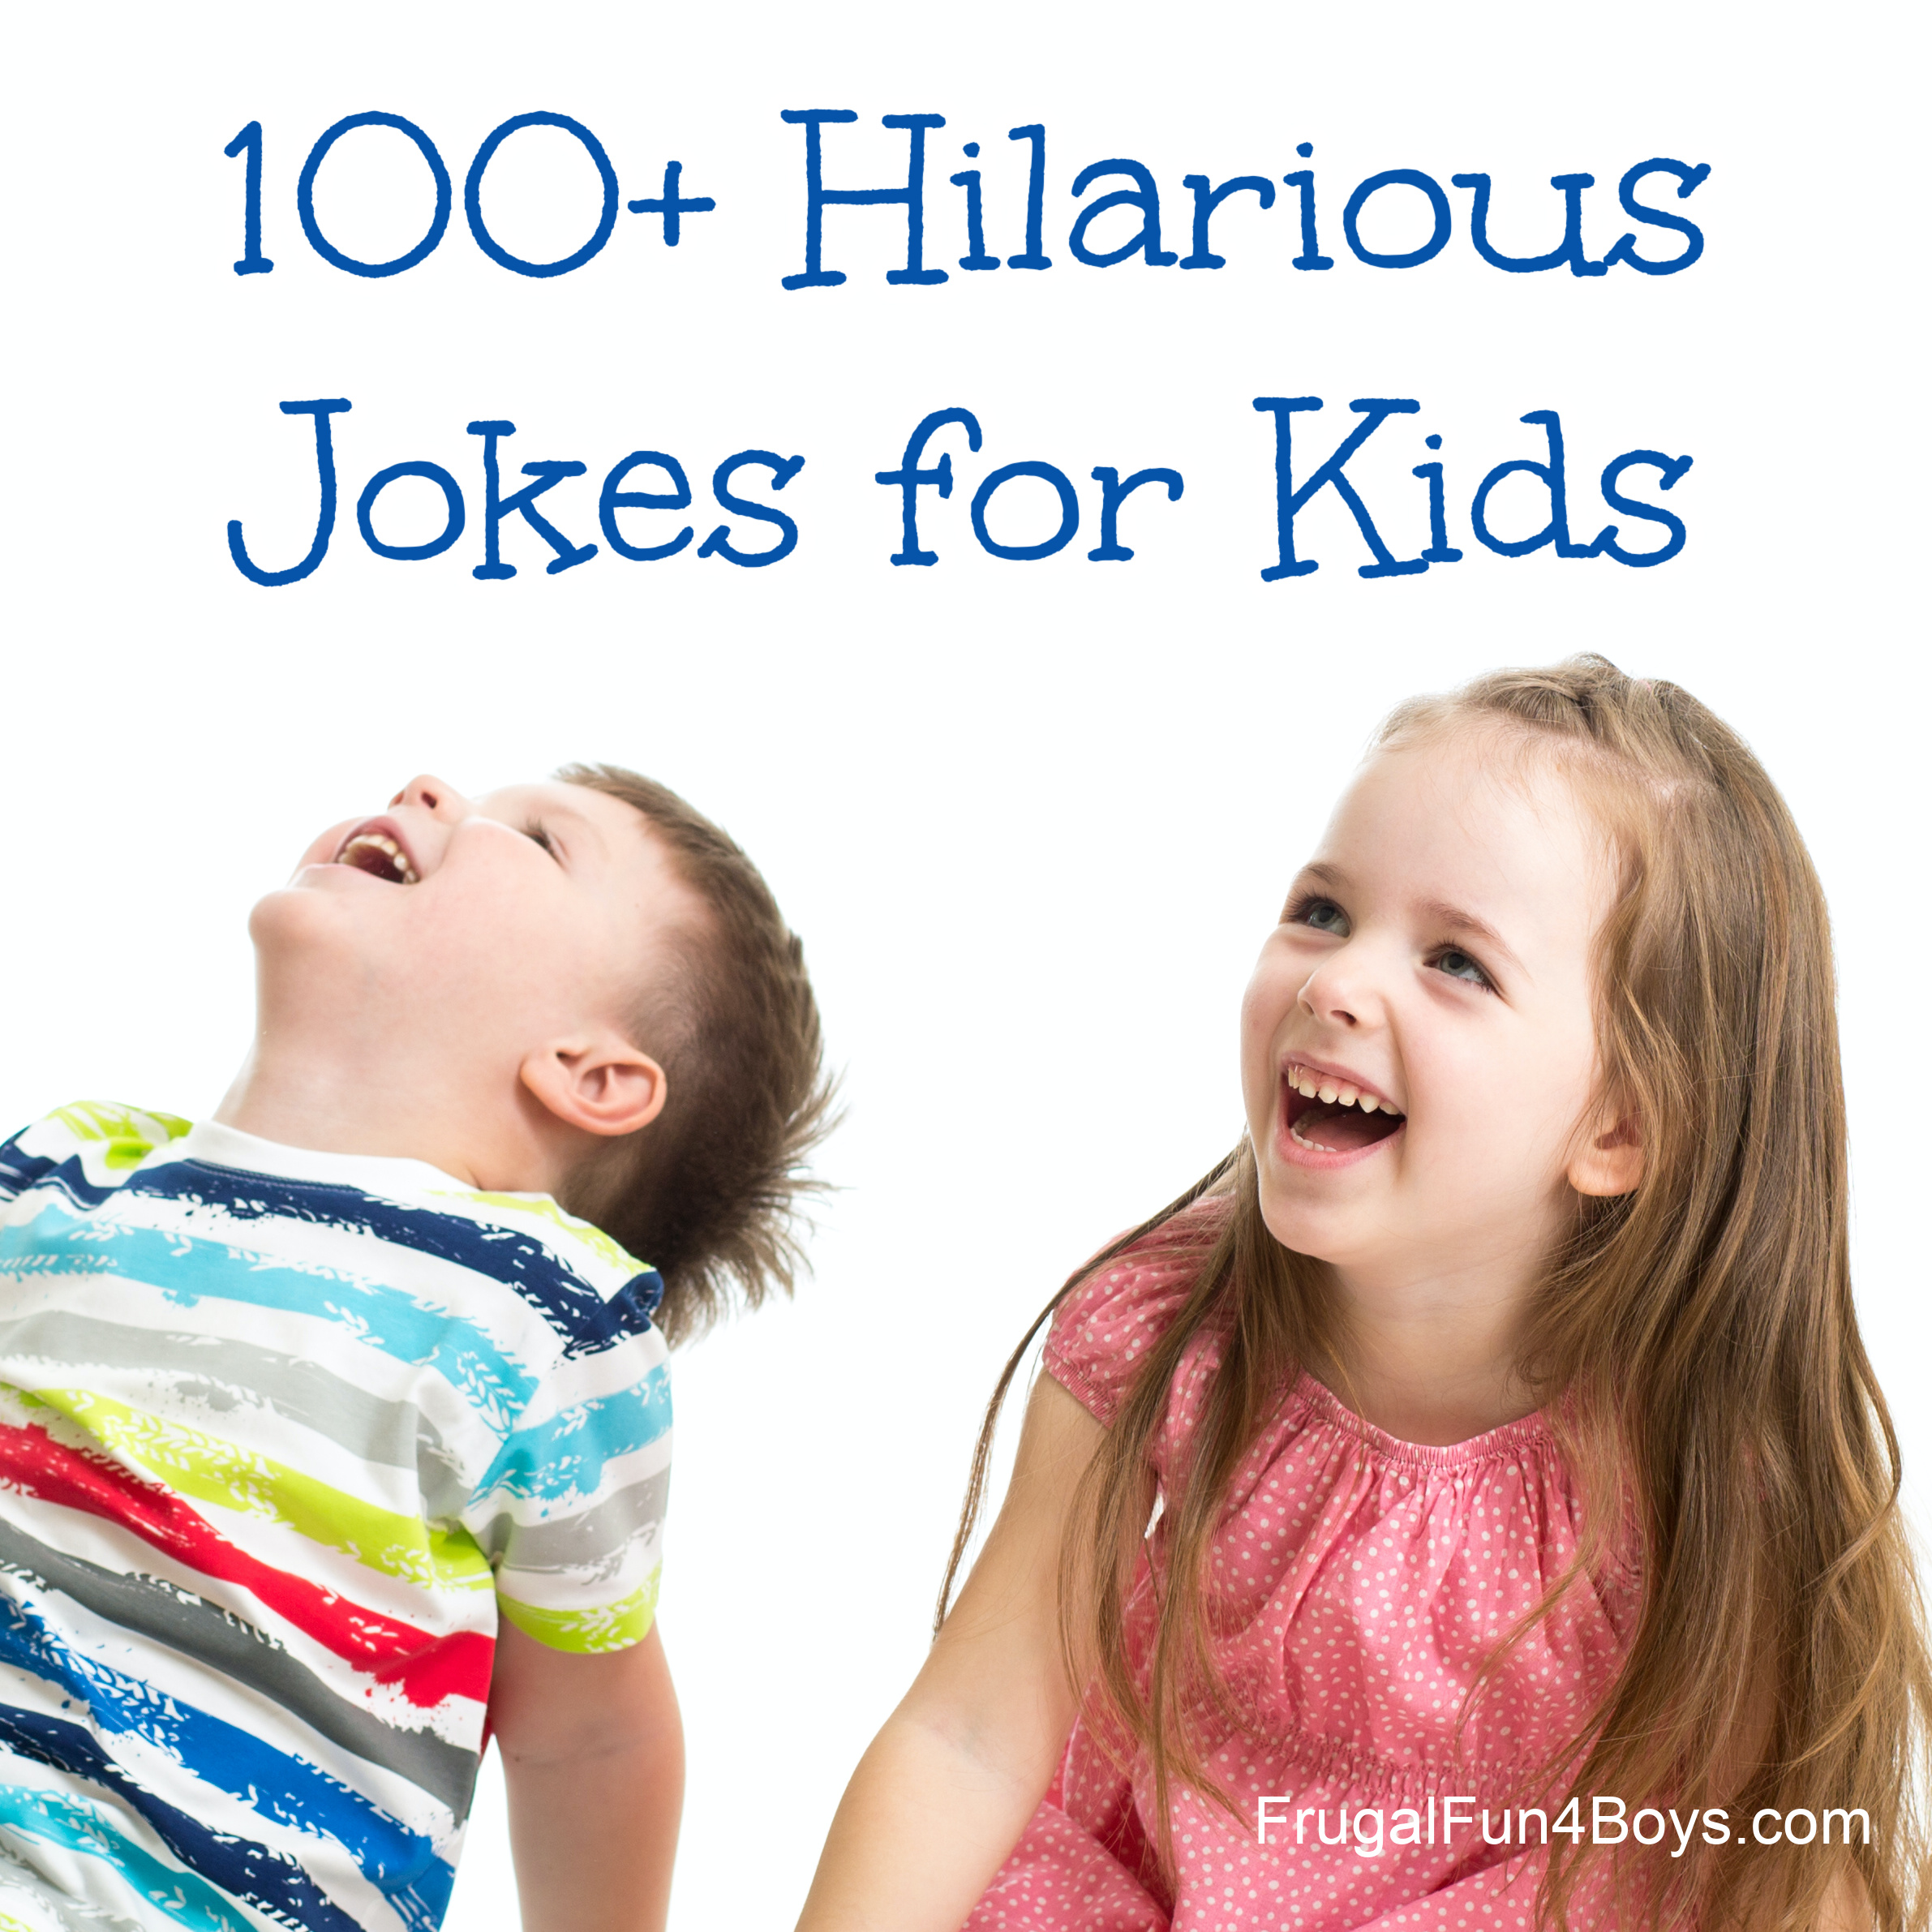 Jokes english top in Over 100